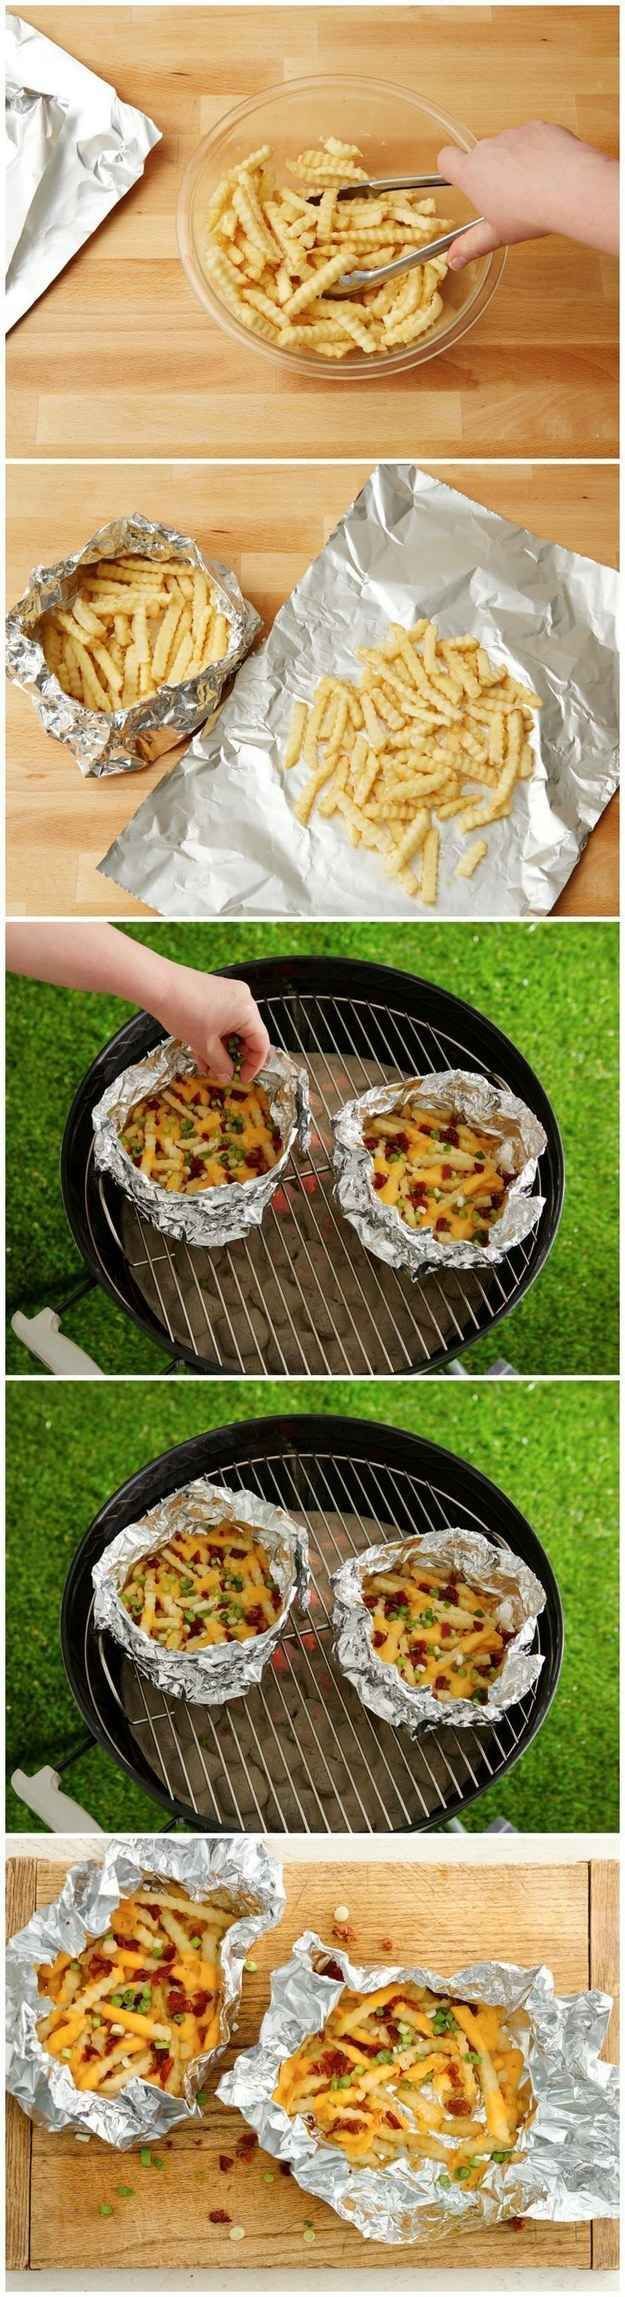 Camping meals in foil: Let’s try the campfire cones, reheated bfast burritos!